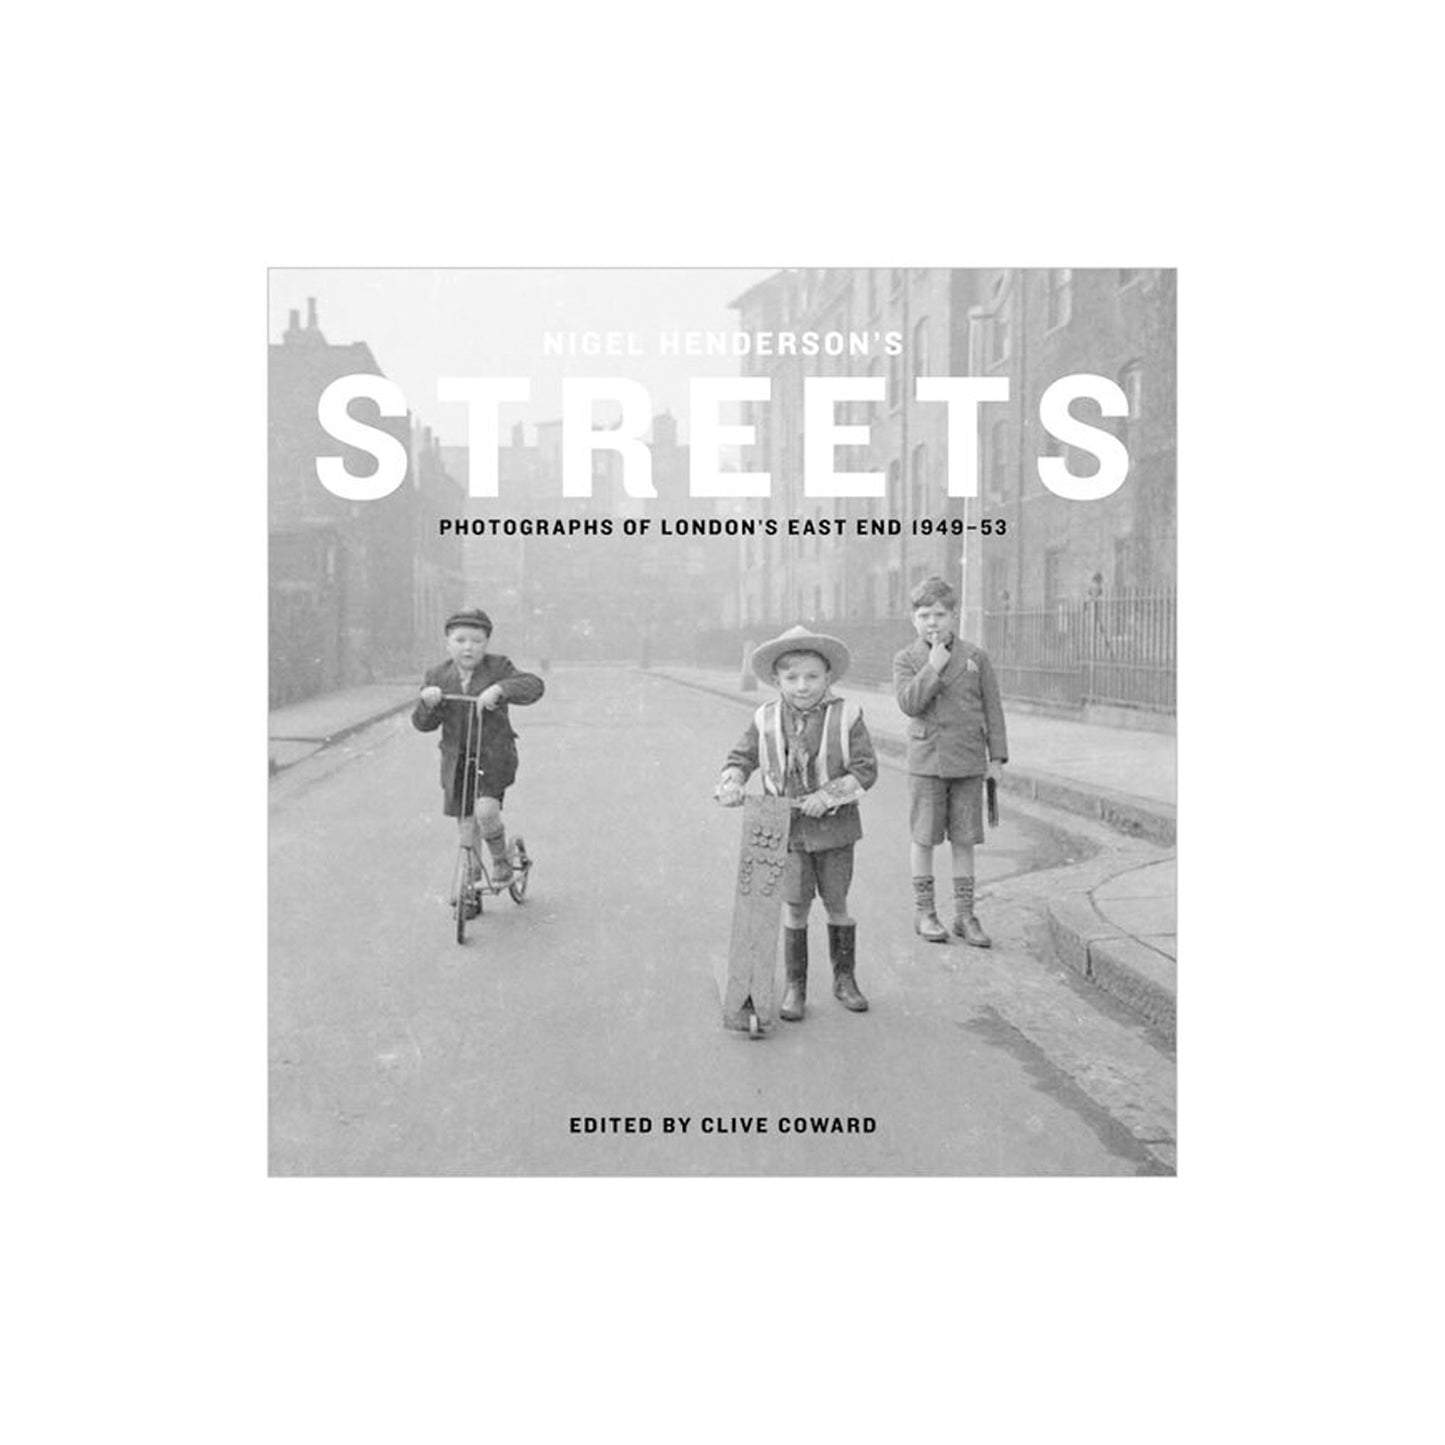 Nigel Henderson's Streets: Photographs of London's East End 1949-53 by Clive Coward